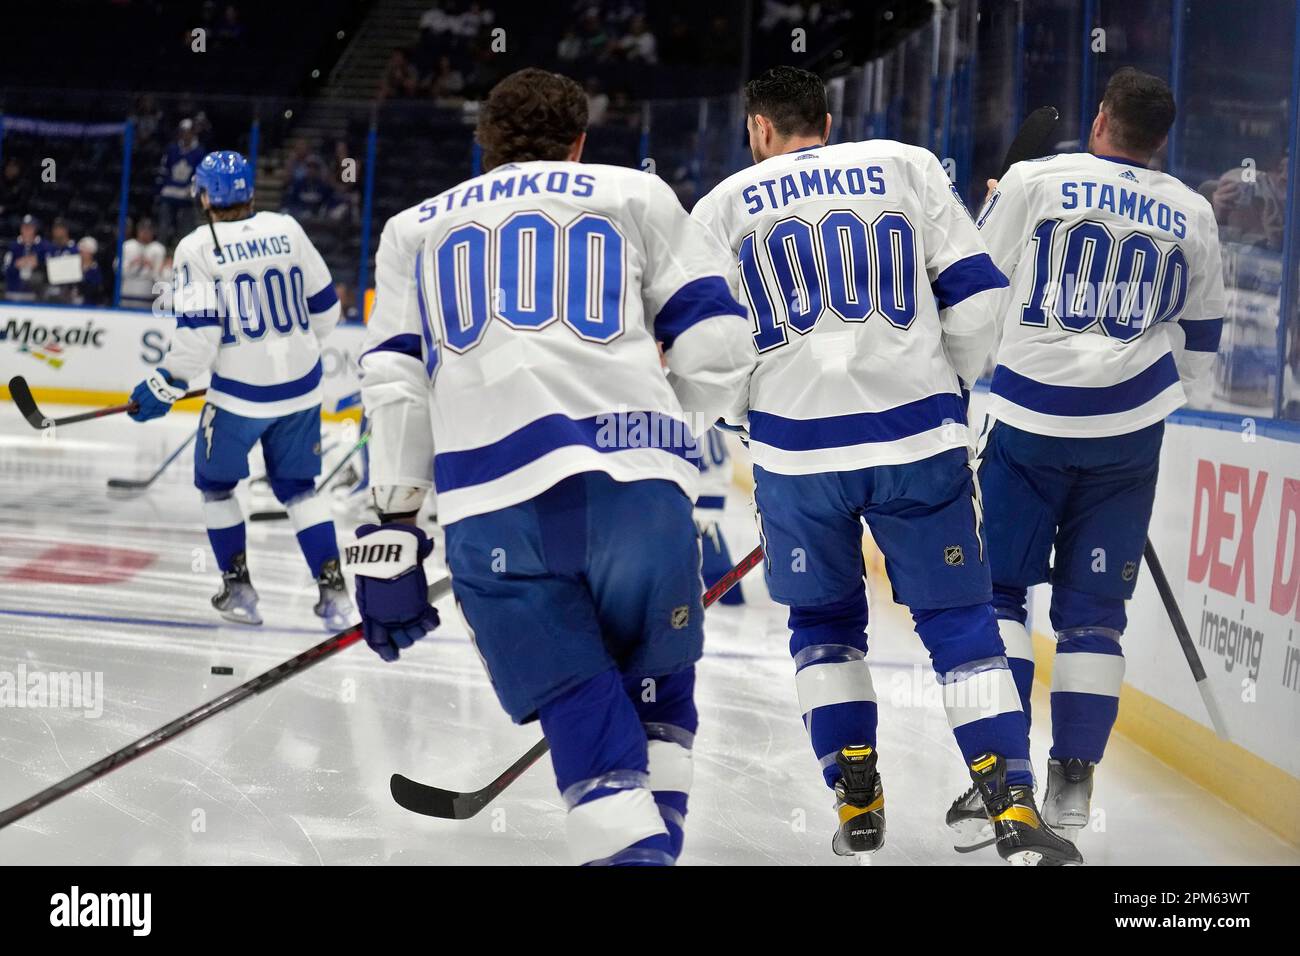 Members of the Tampa Bay Lightning wear Stamkos 1000 jerseys during warmups  before an NHL hockey game against the Toronto Maple Leafs Tuesday, April  11, 2023, in Tampa, Fla. The team is